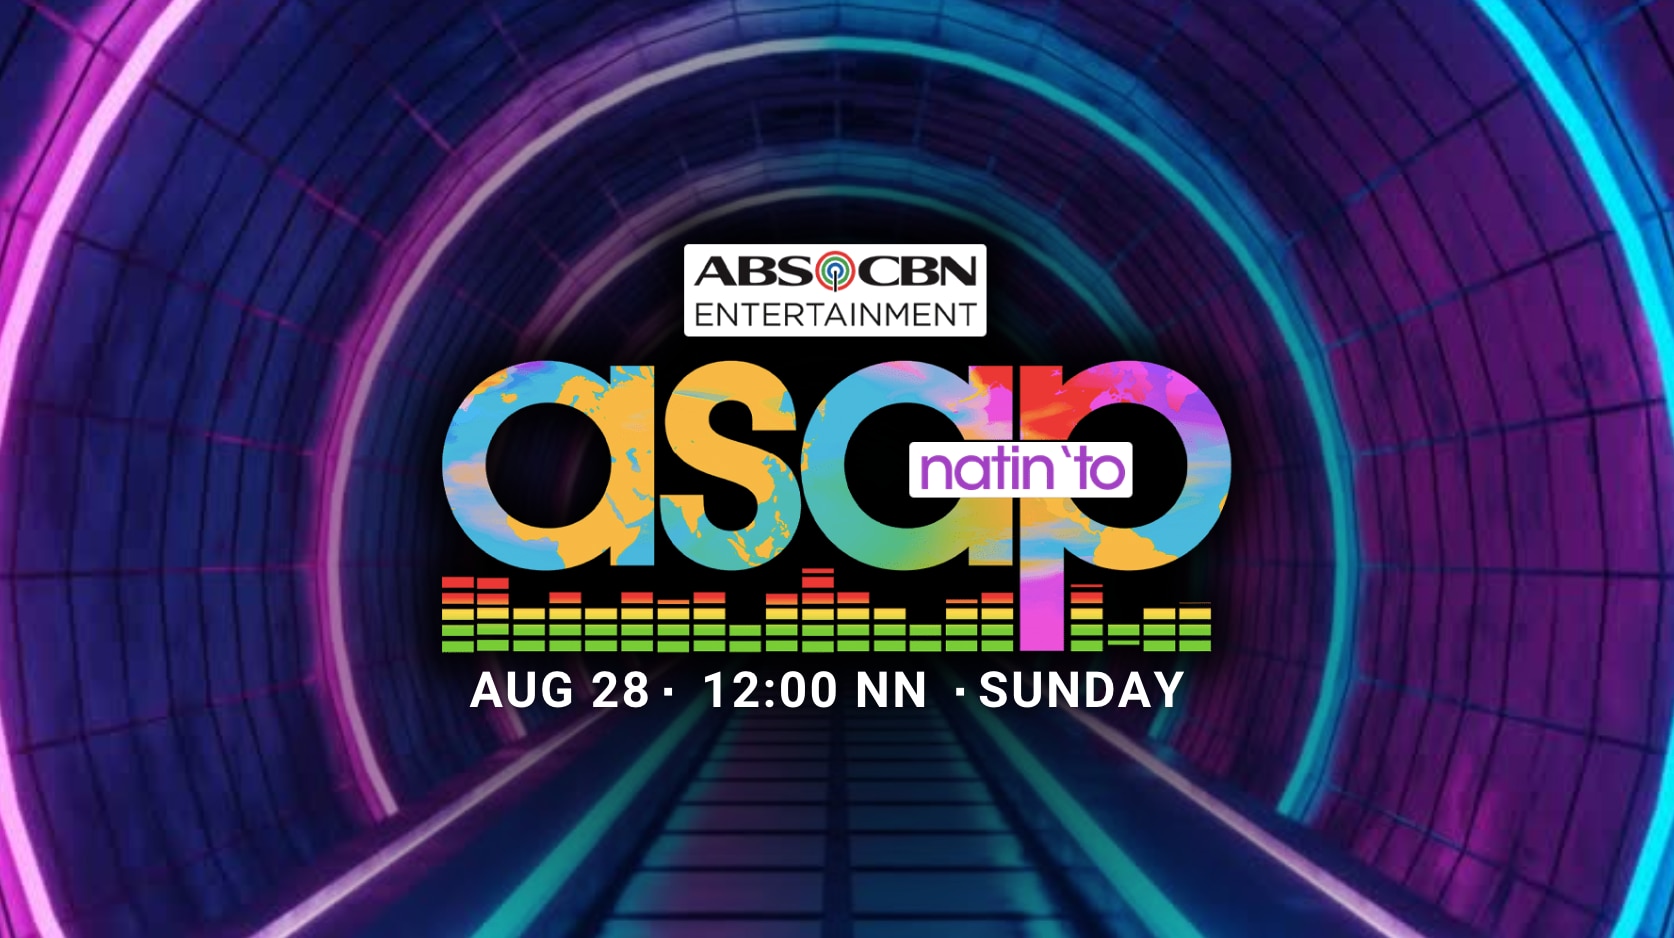 It's an All-Star Concert Experience this Sunday on 'ASAP Natin 'To'